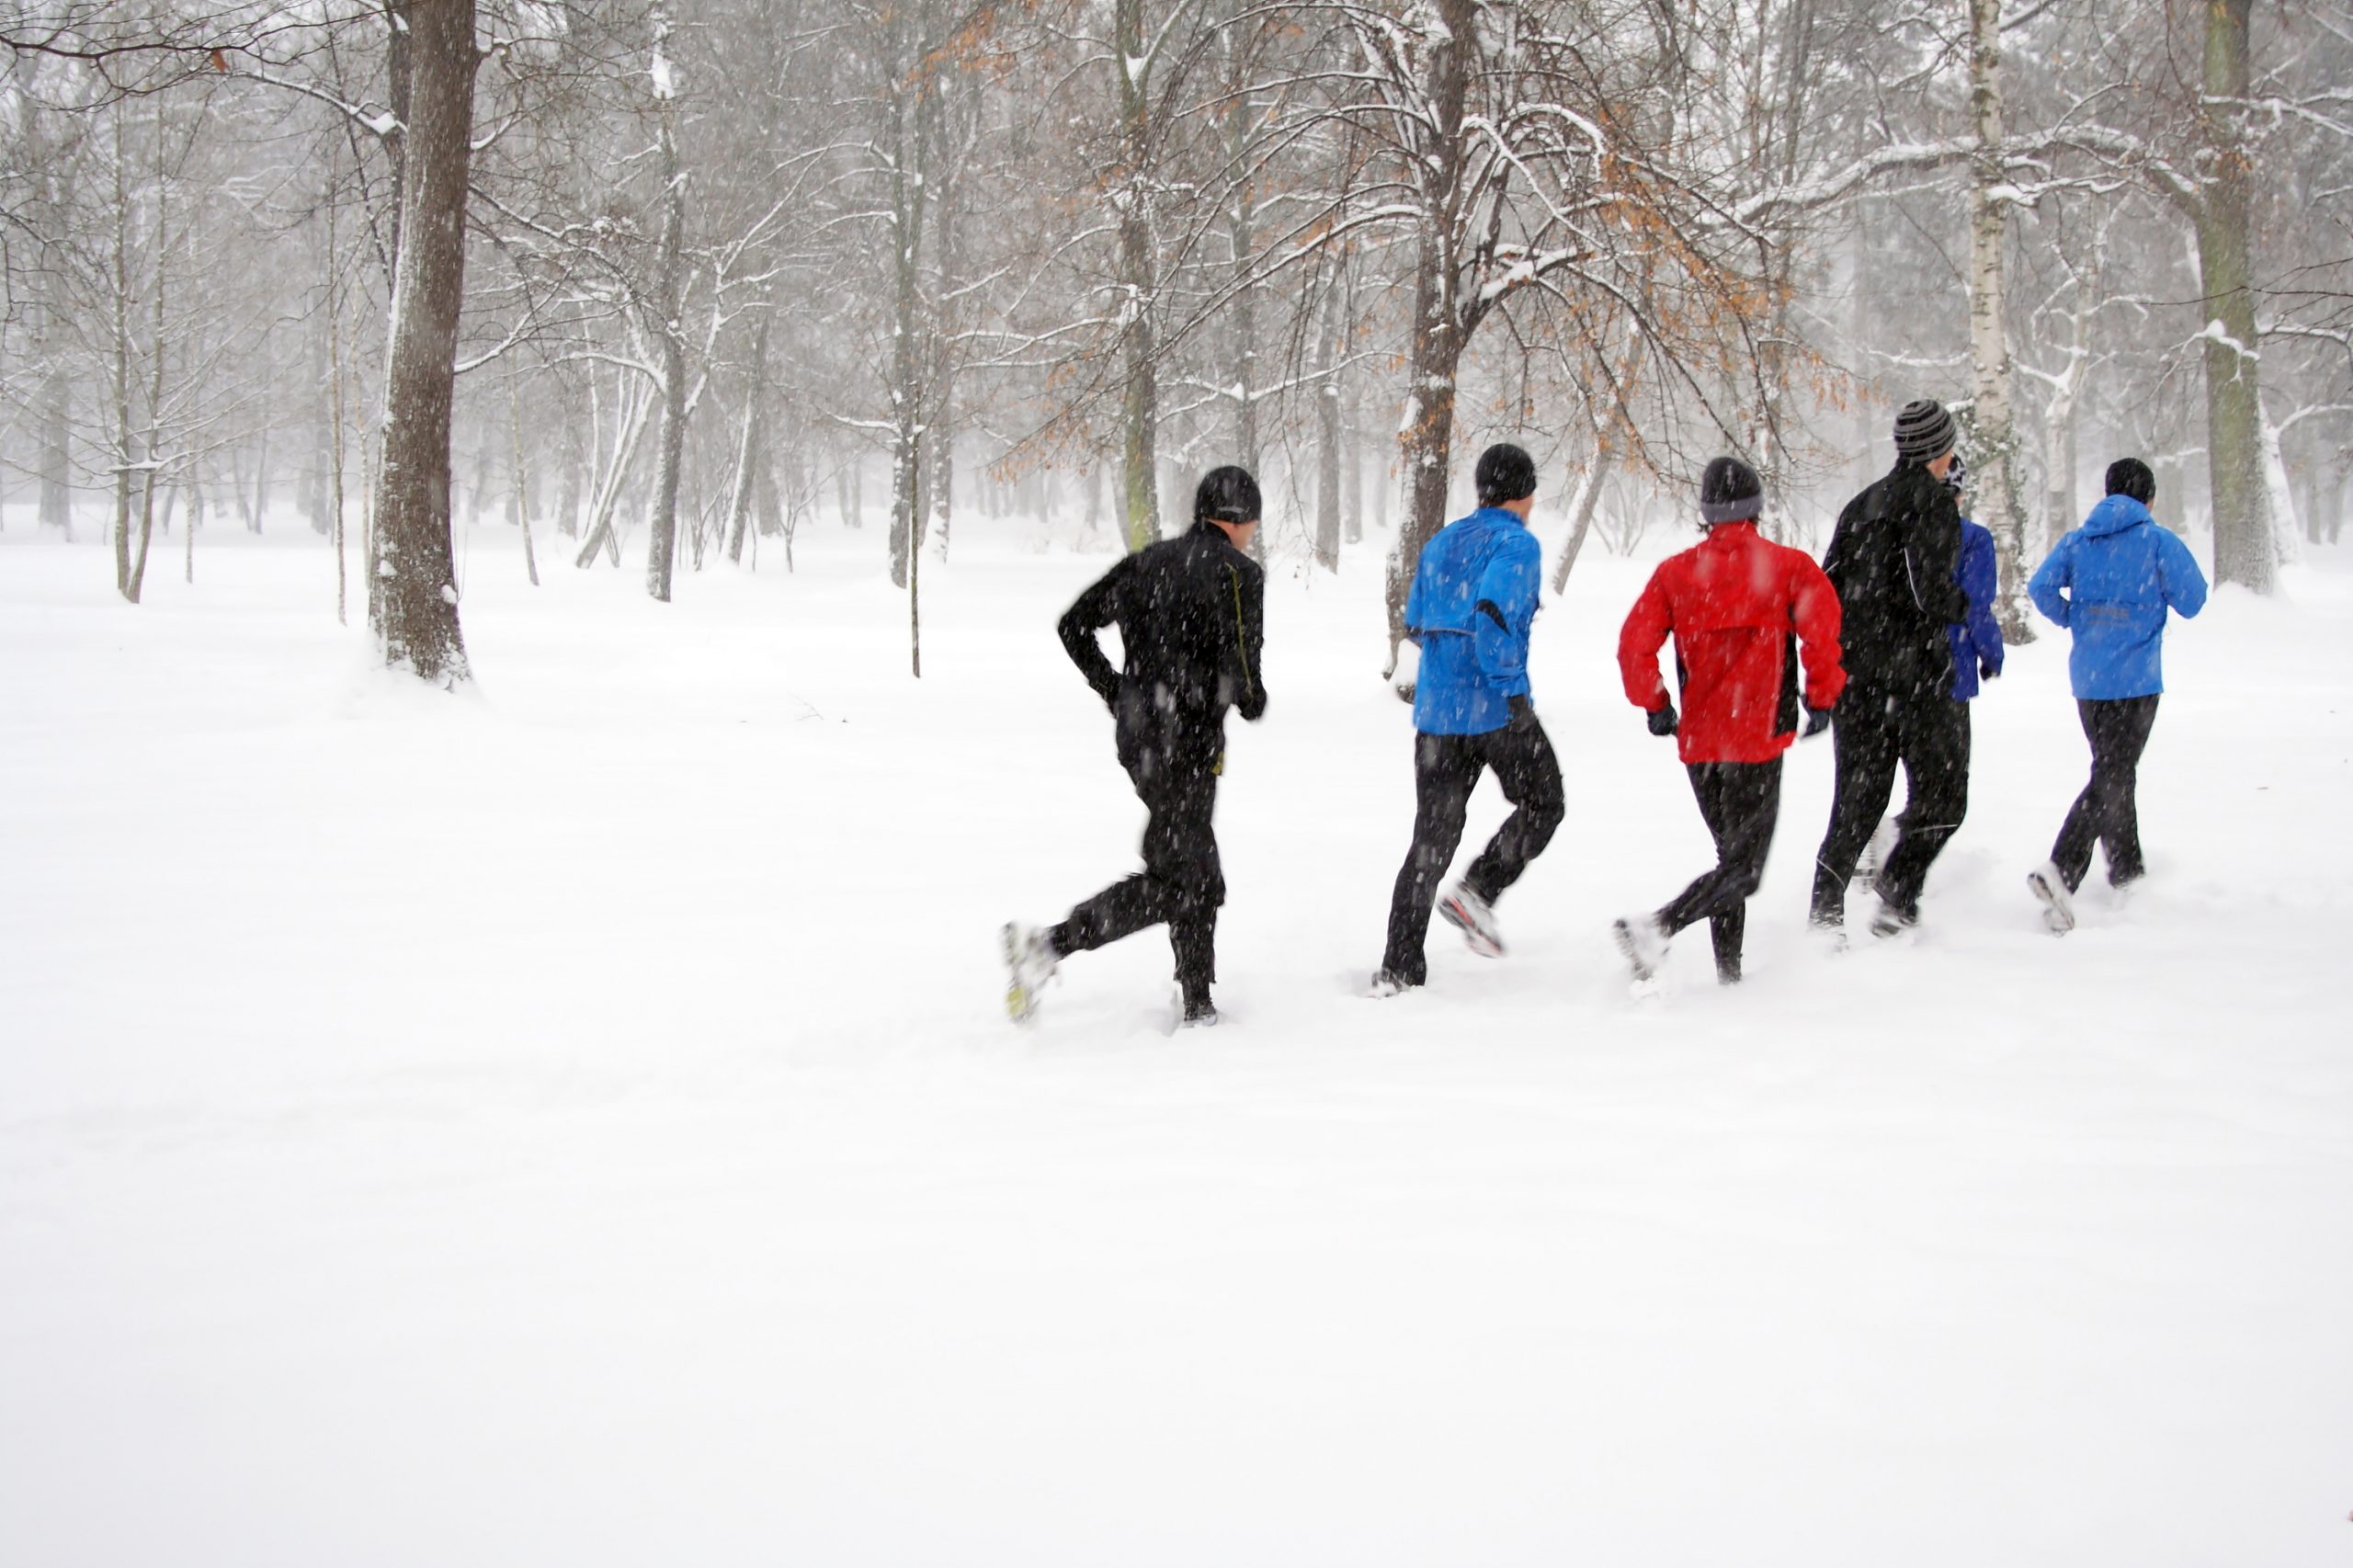 The Runner’s Winter Dilemma: Train Indoors or Outdoors